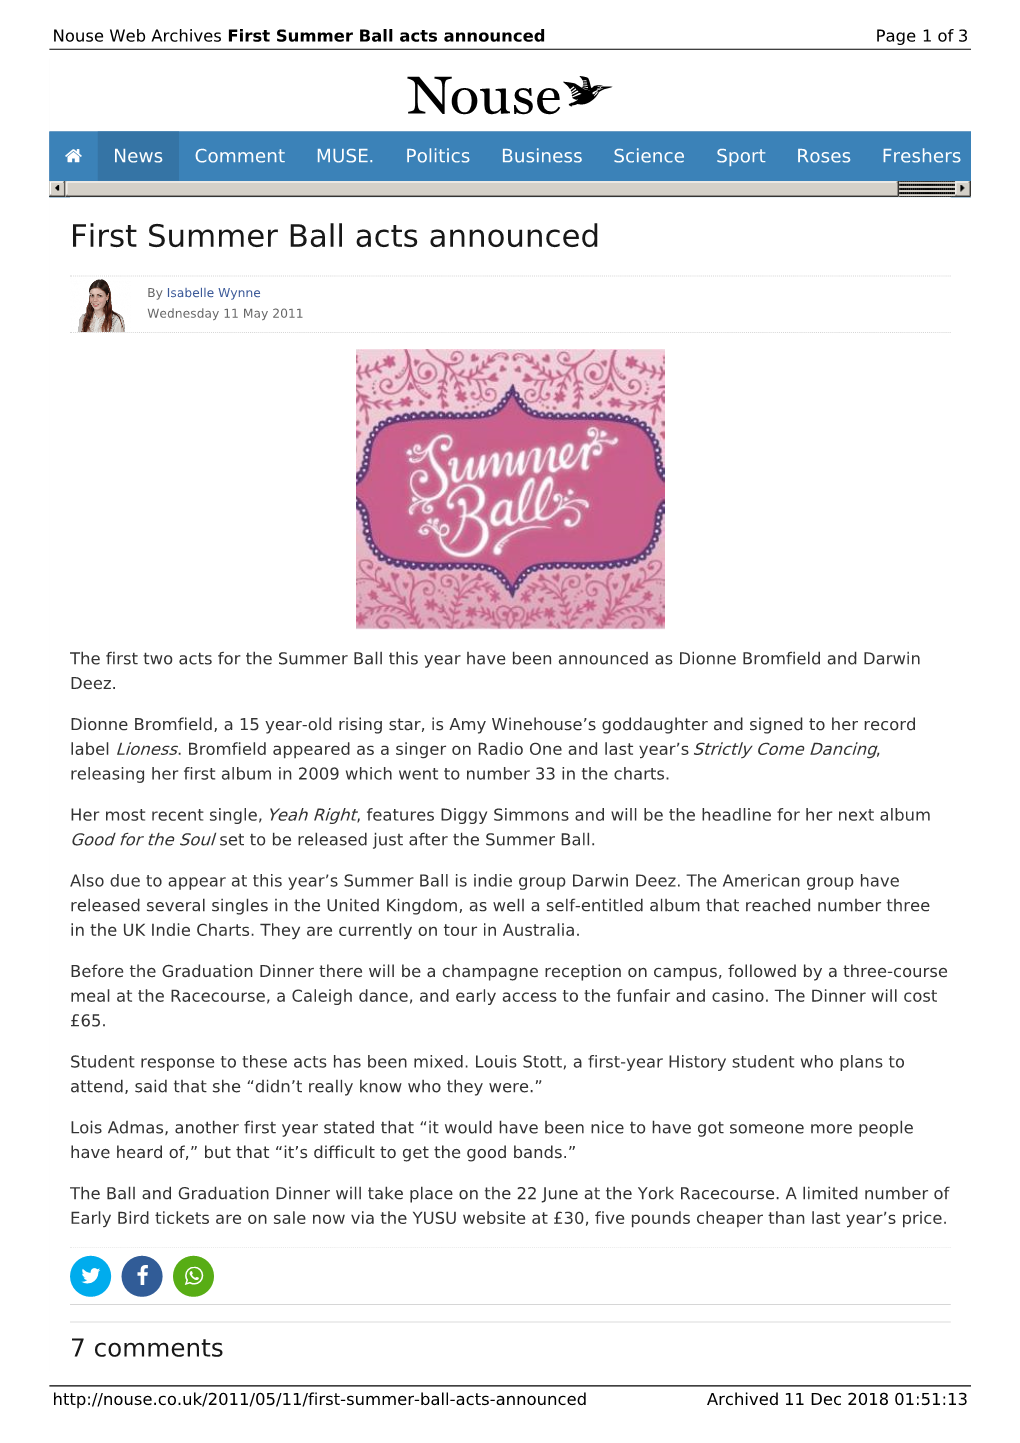 First Summer Ball Acts Announced | Nouse